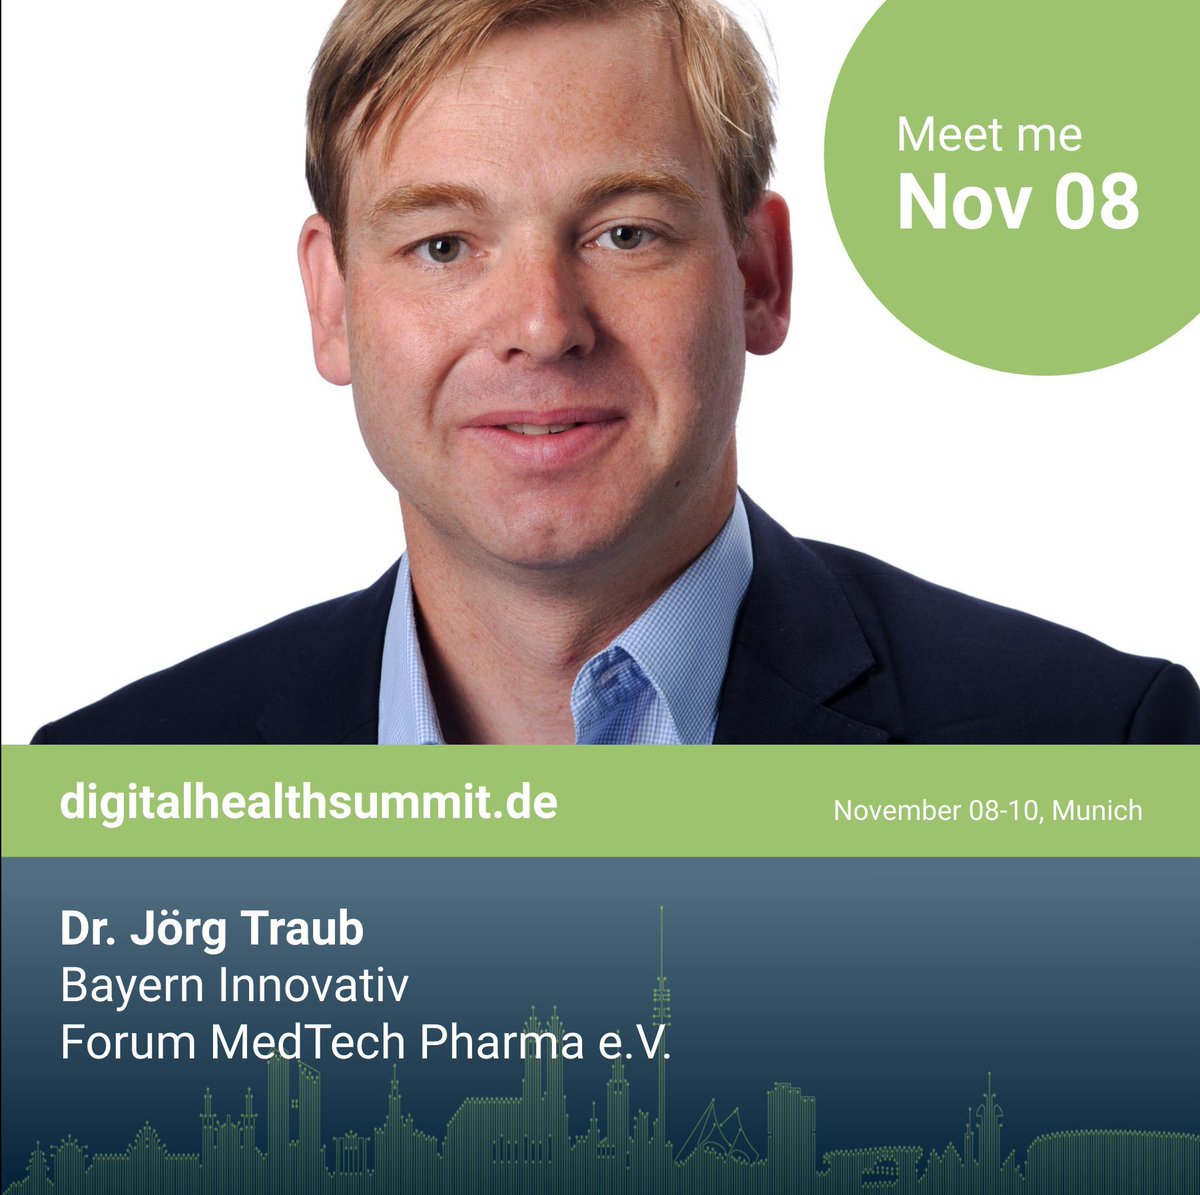 Meet Dr. Jörg Traub at the Digital Health Summit 2023! 
Get your Tickets now! 
Register on our Website: buff.ly/2JXqKlj

#dhsmuc #DHS23